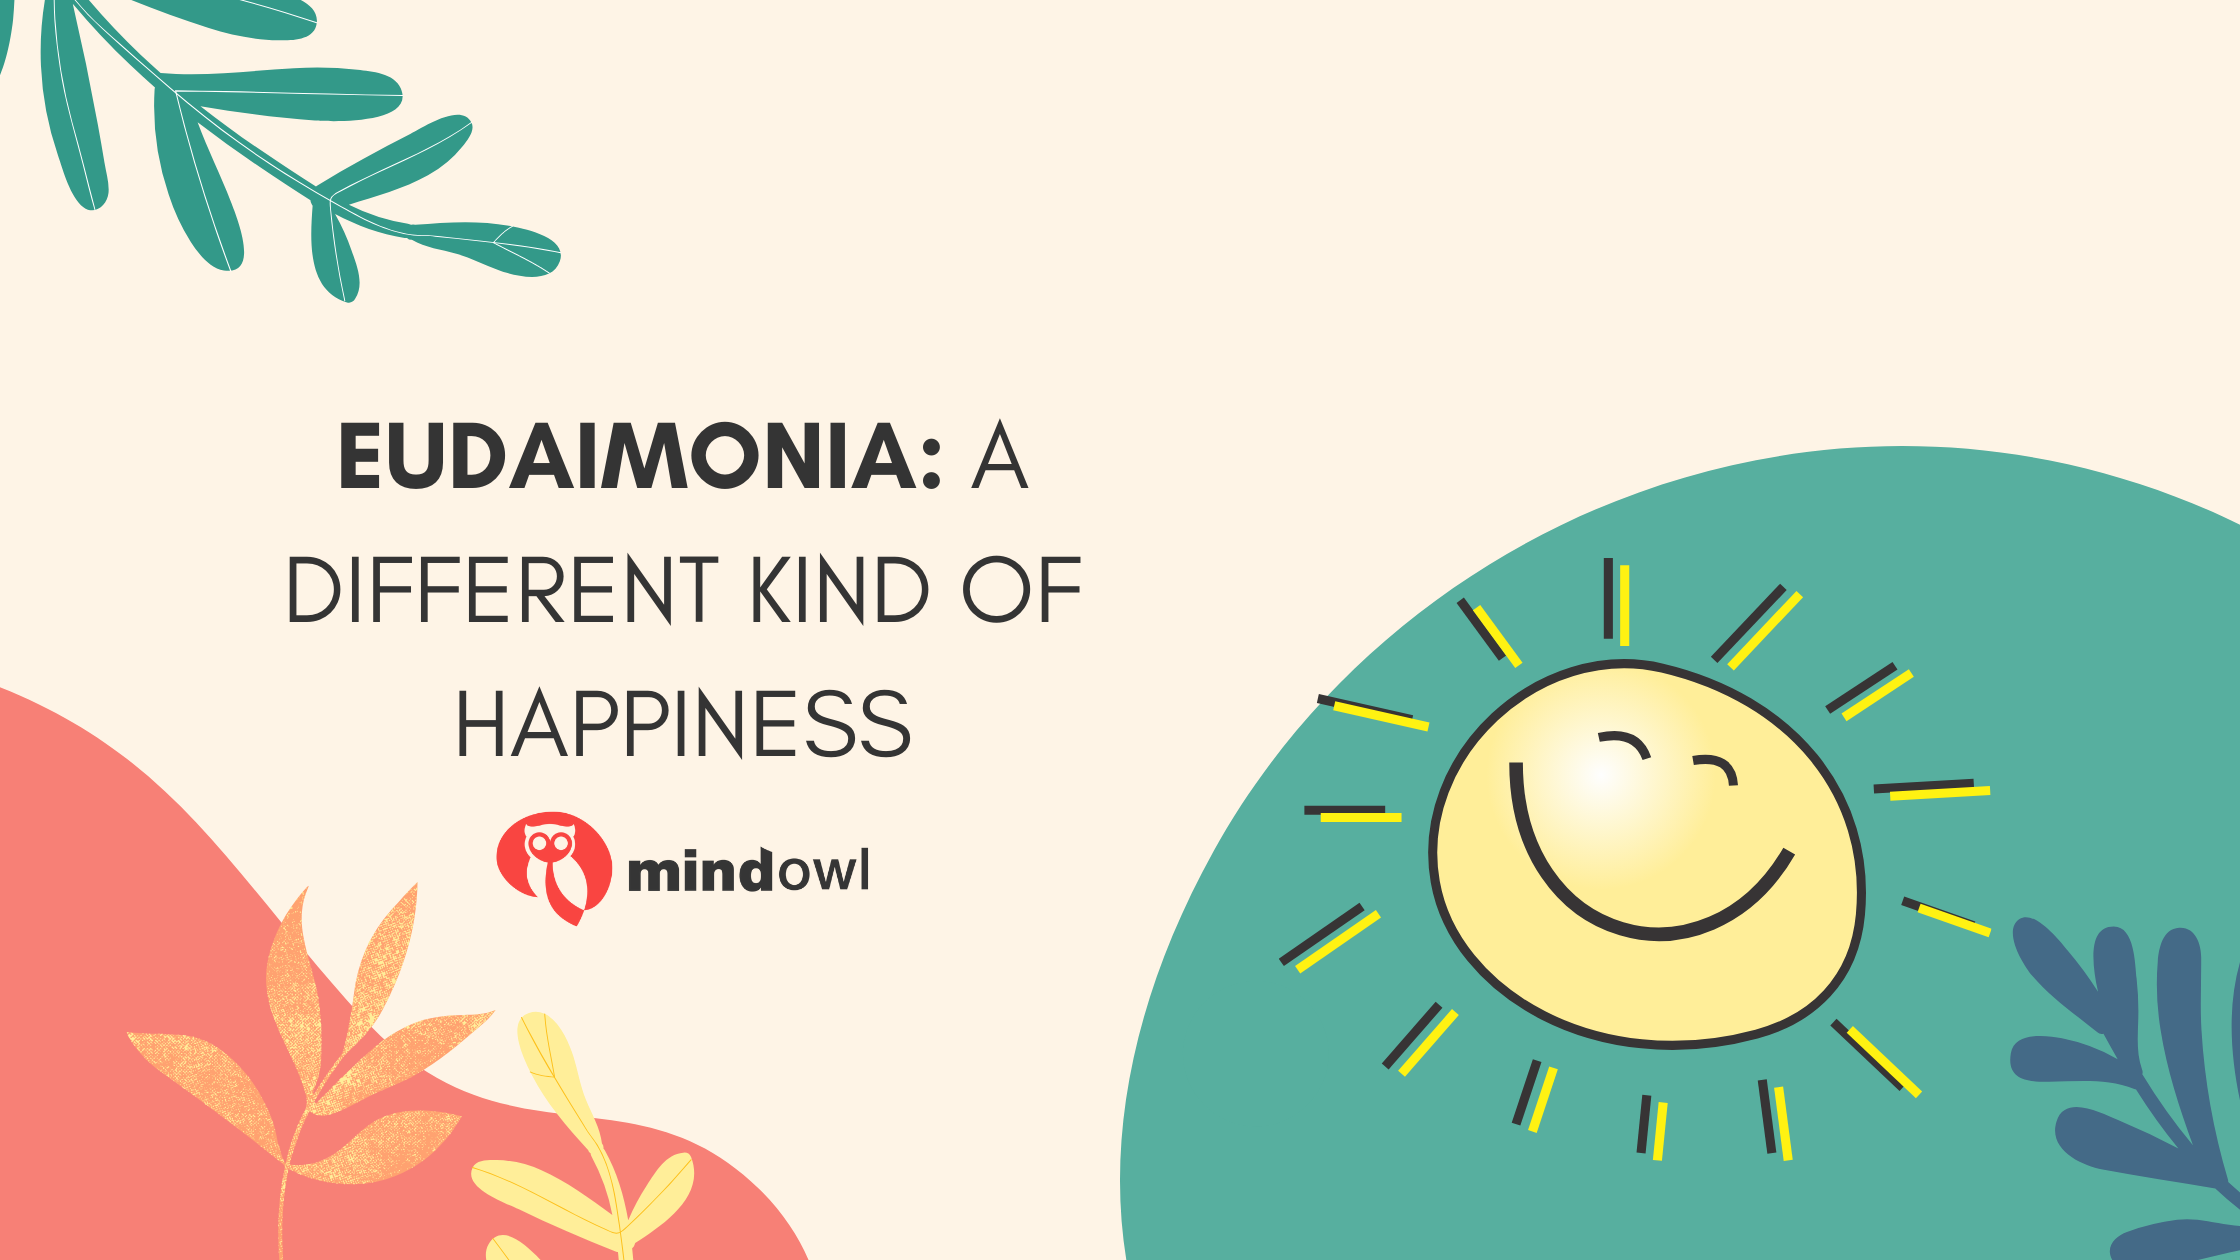 Eudaimonia: a different kind of happiness